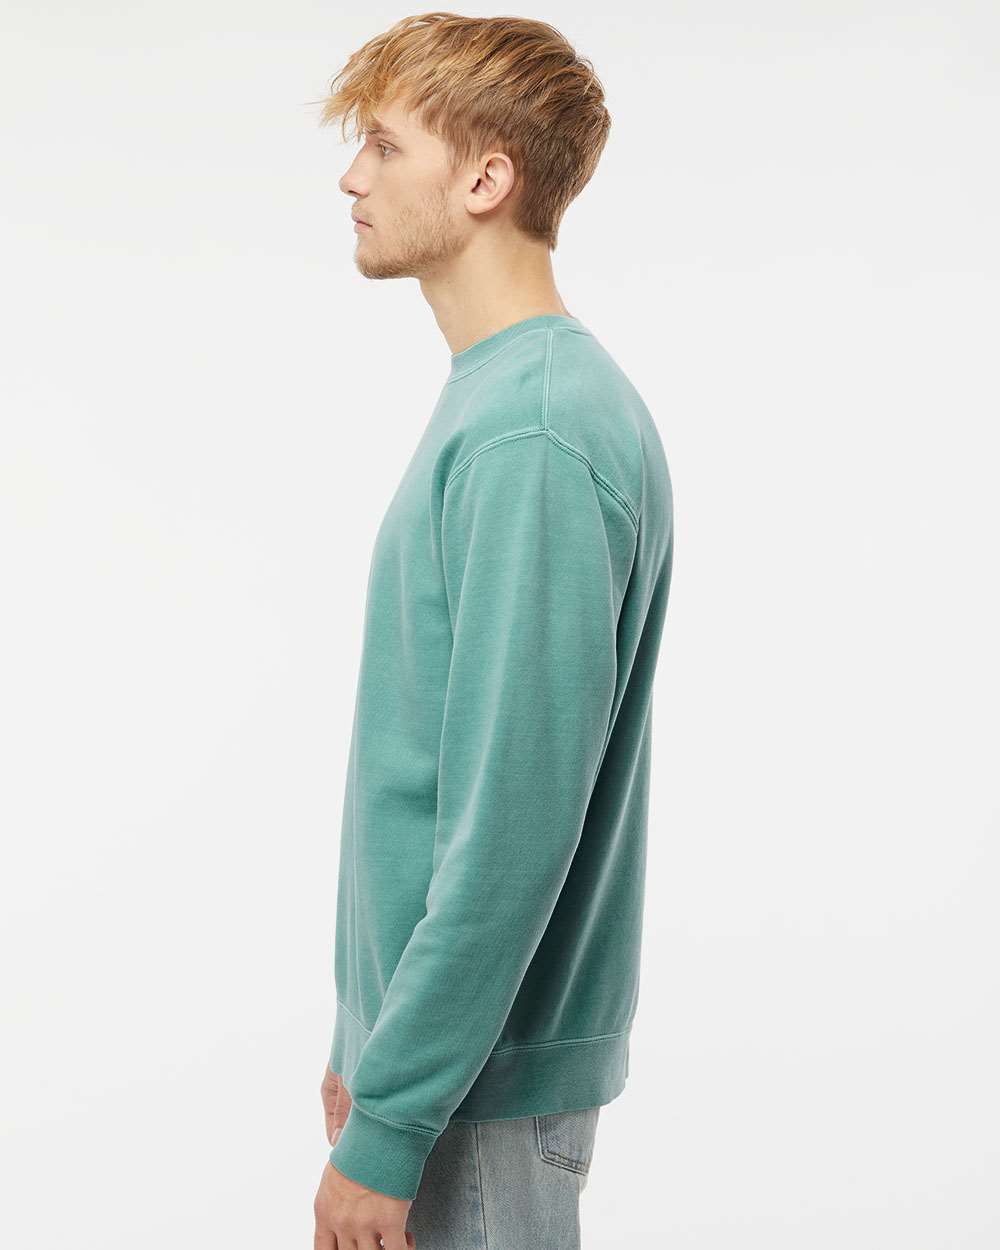 Independent Trading Co. PRM3500 - Midweight Pigment-Dyed Crewneck